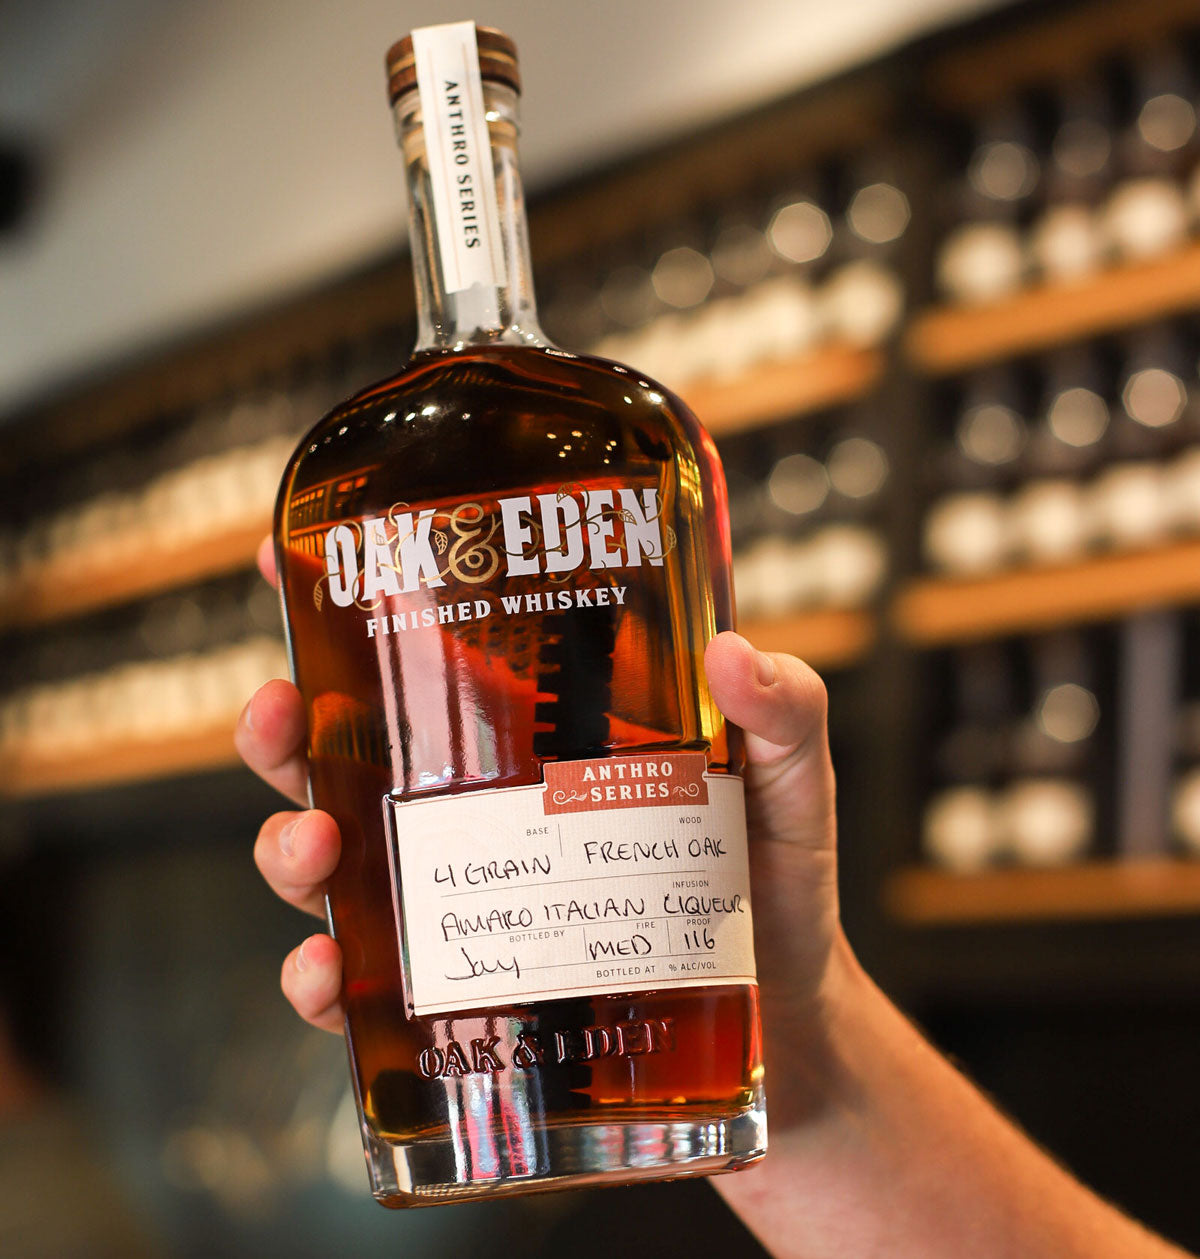 A hand is holding a bottle of Oak & Eden whiskey in front of a bar that has shelving lining the walls in the background.